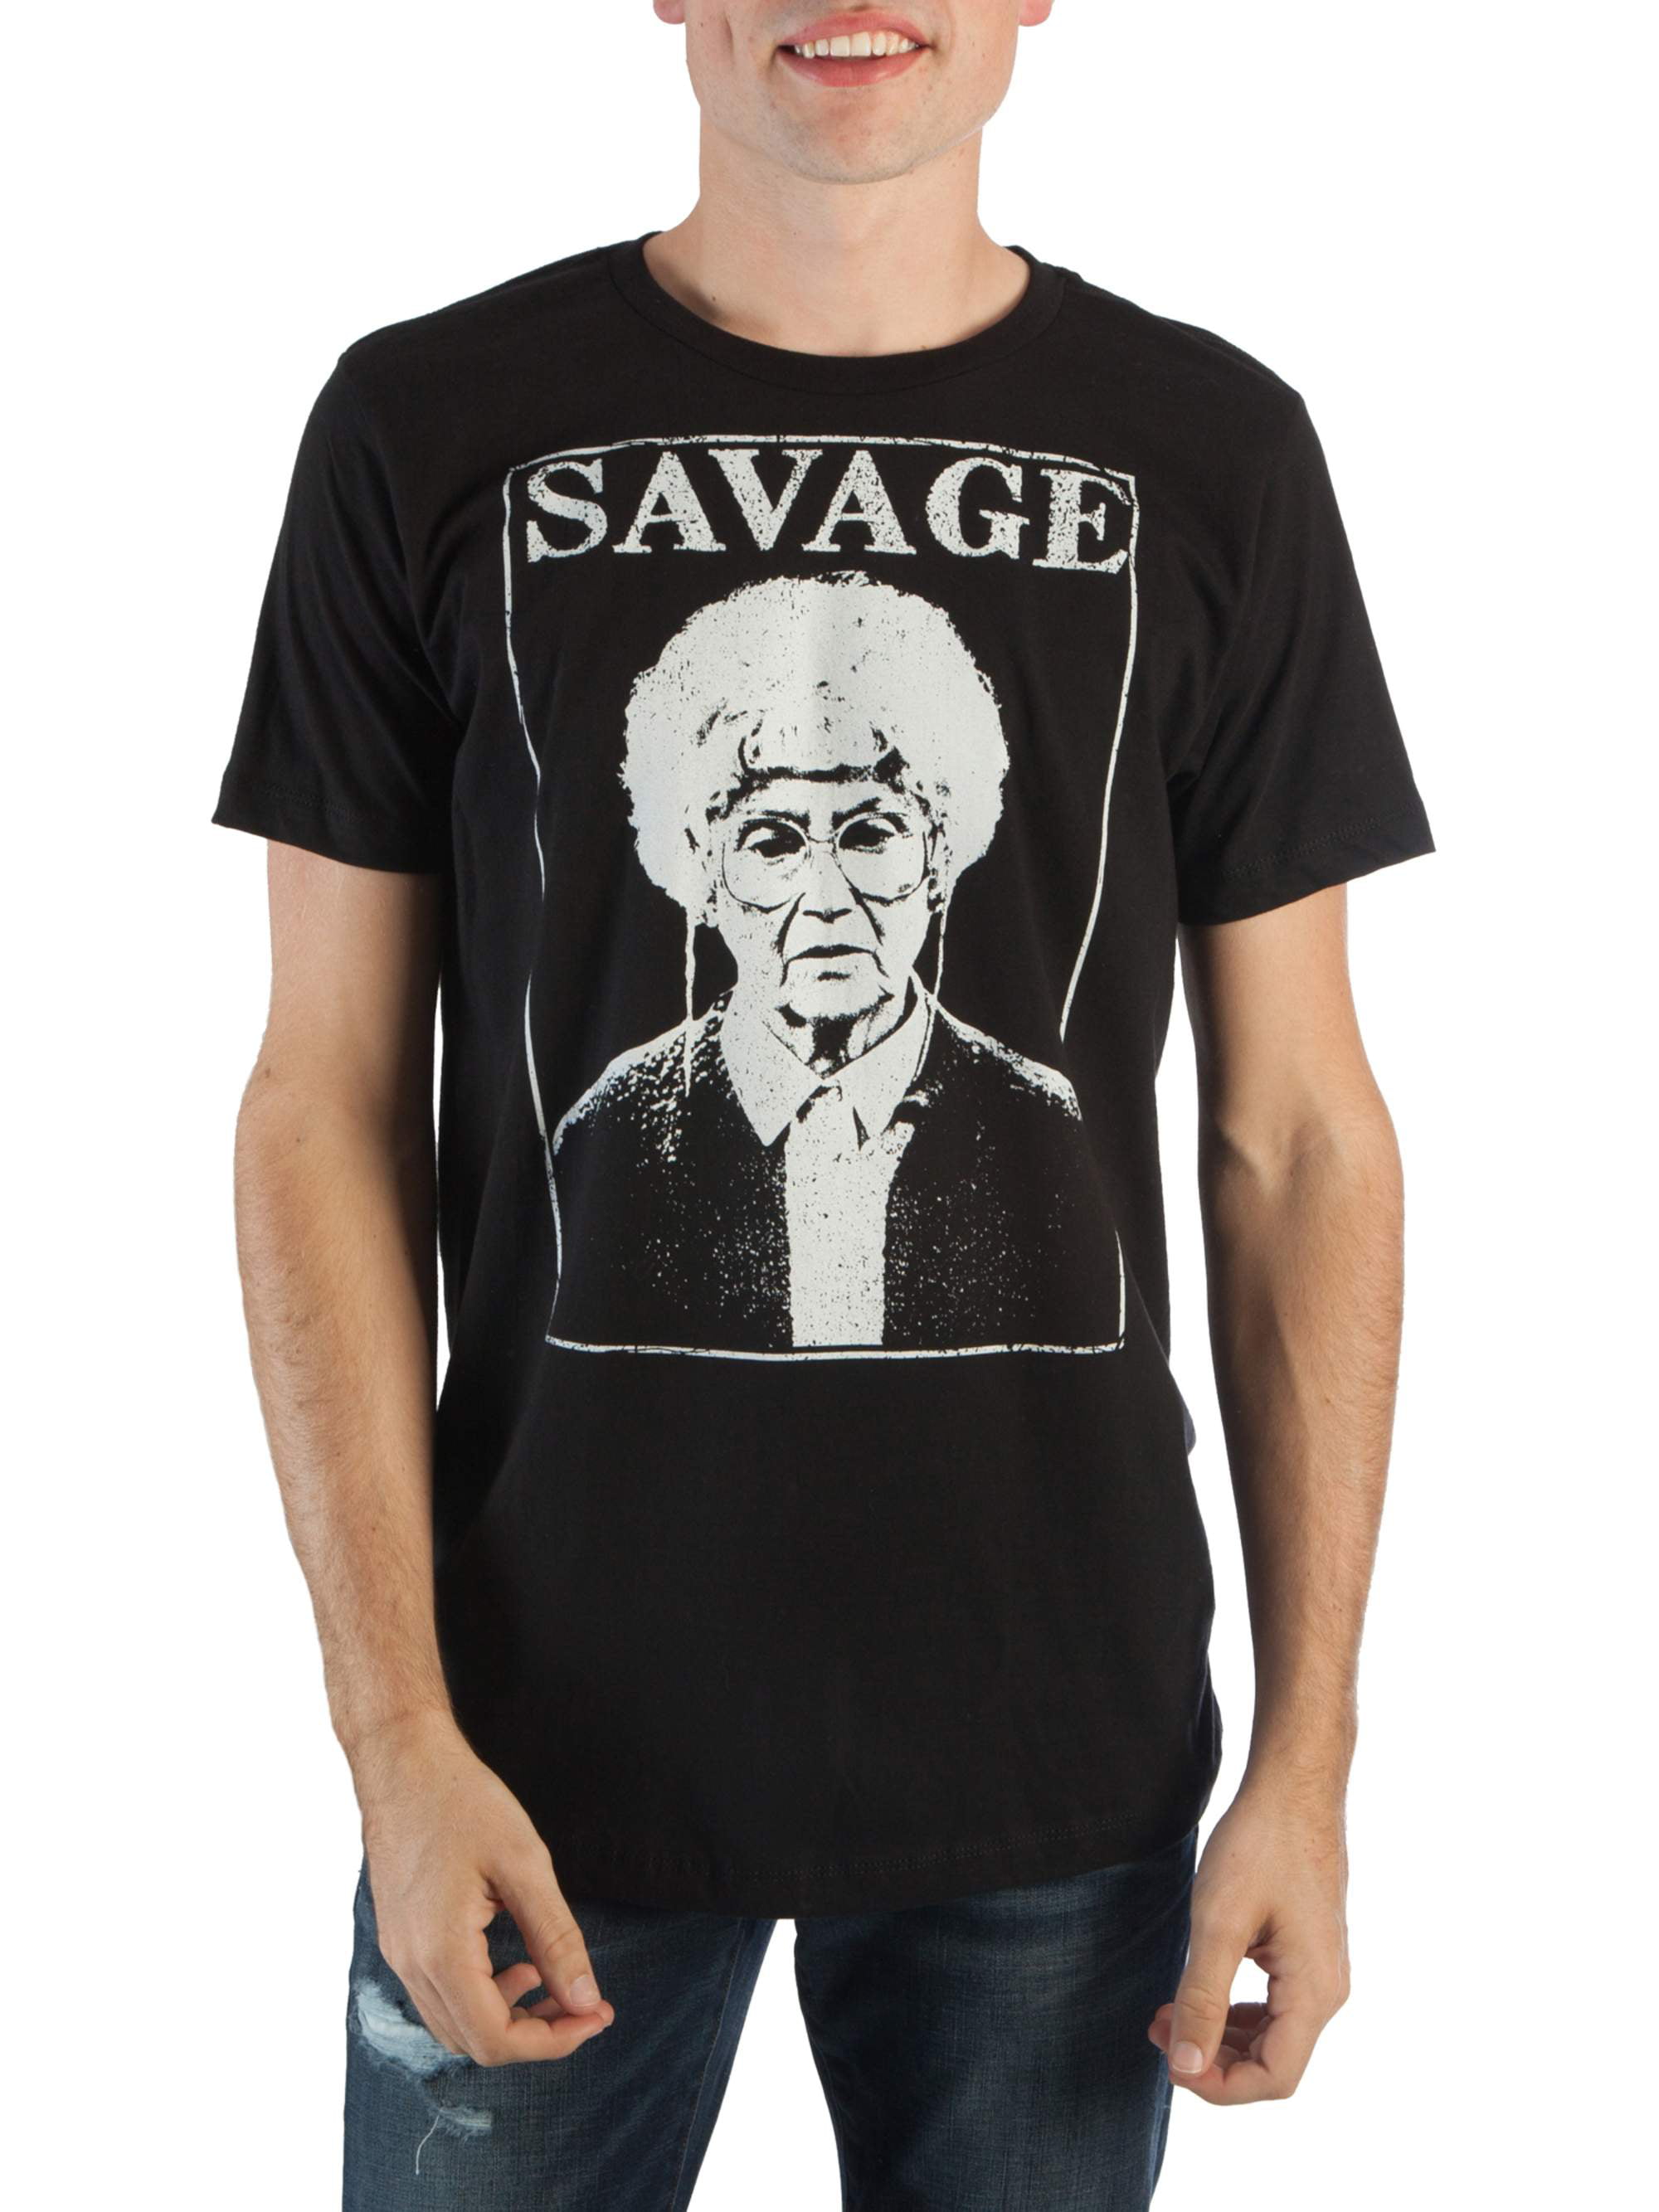 The Golden Girls Sophia Is Savage Distressed Graphic Men's Black T-Shirt Tee NEW